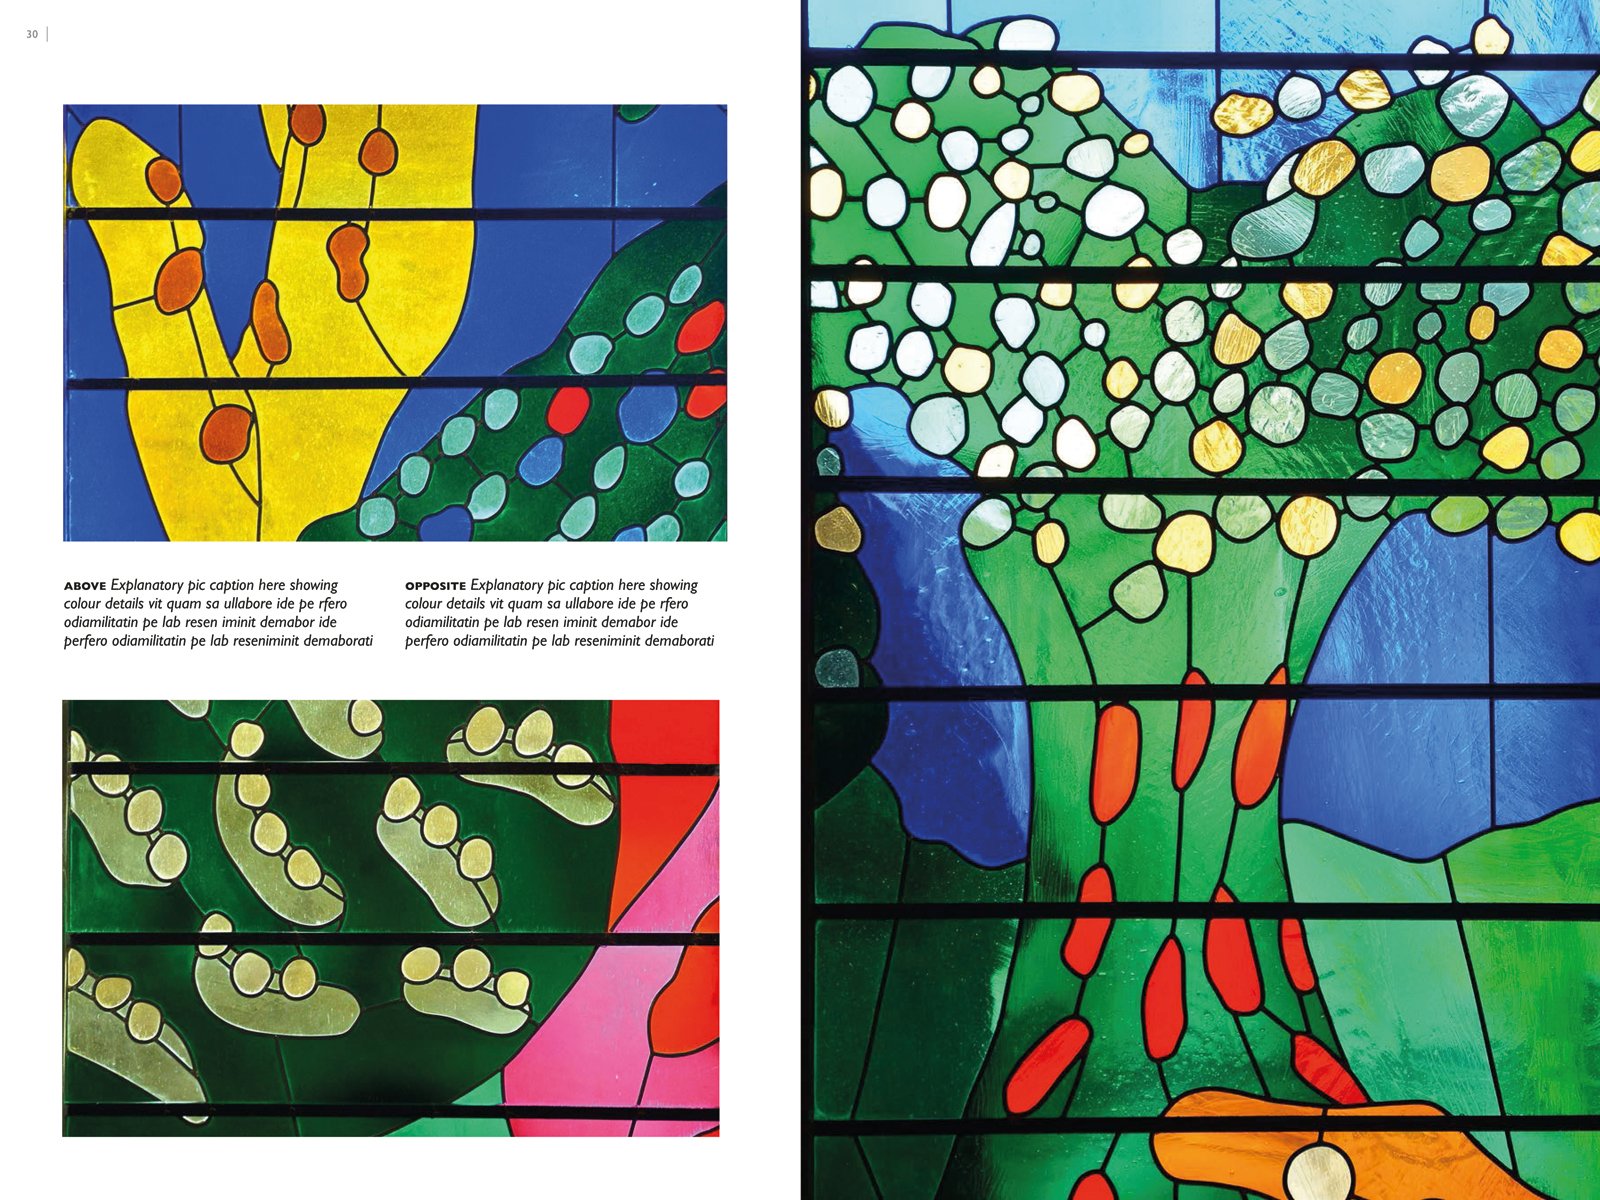 Stained glass design by David Hockney, The Queen's Window on black cover, The Queen's Window by David Hockney Westminster Abbey in green and white font to right